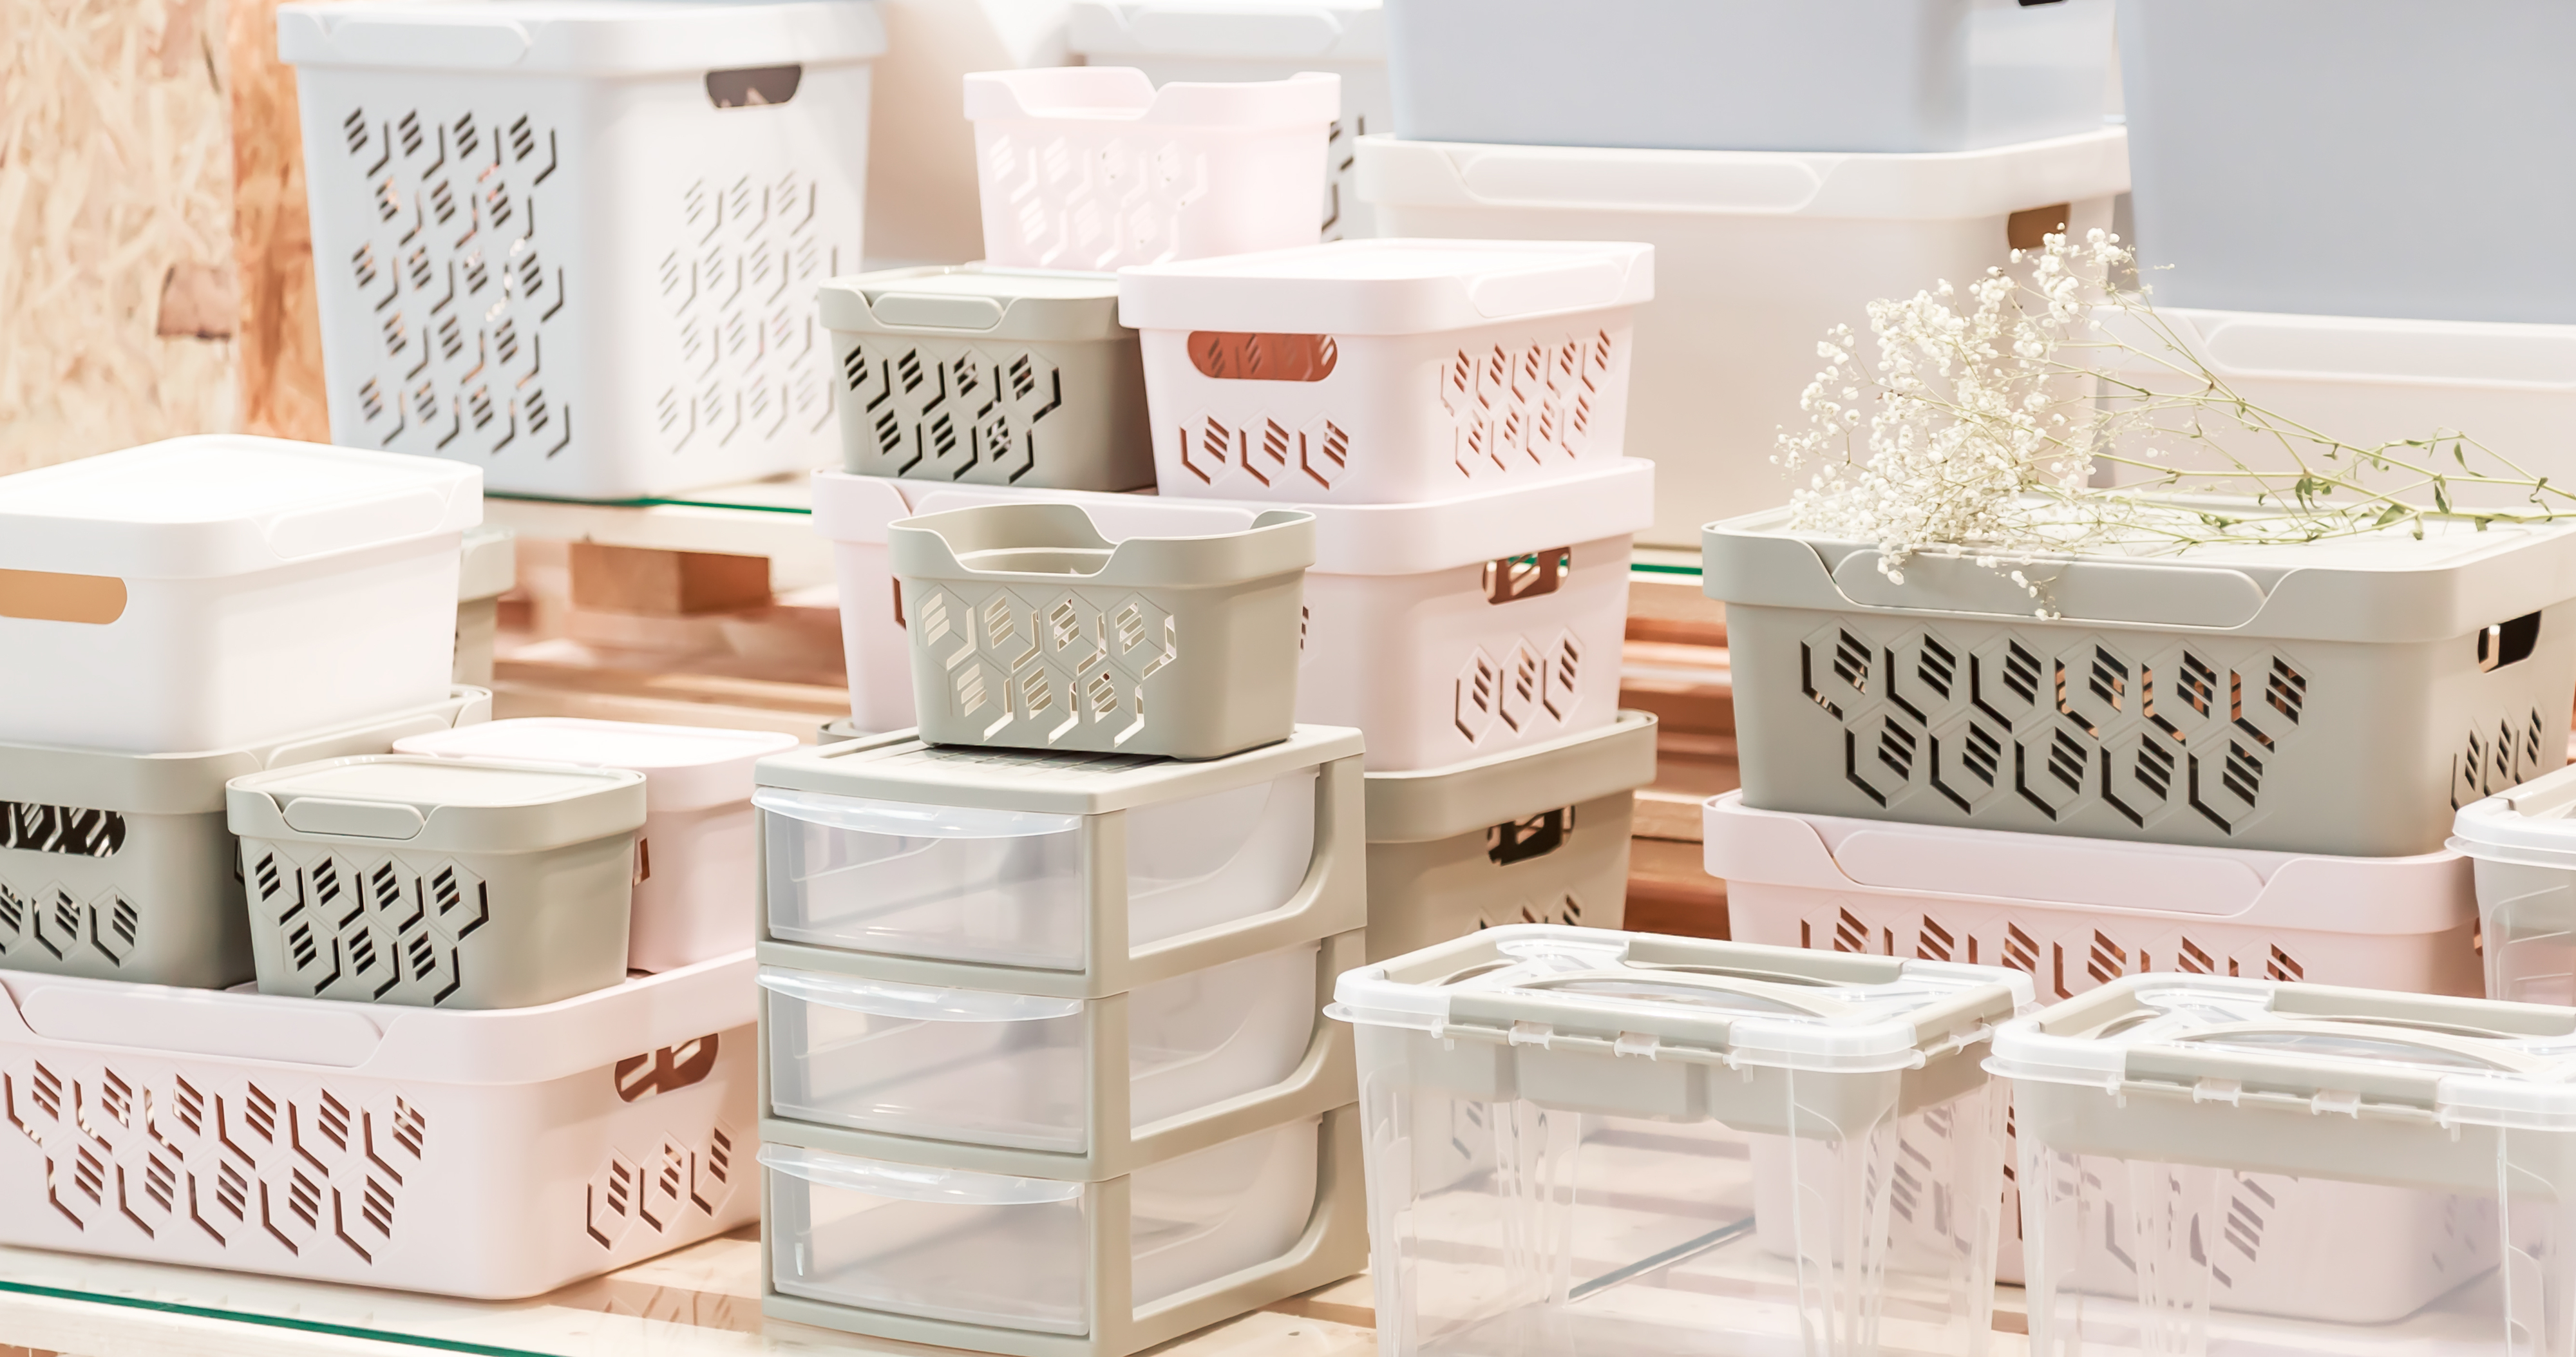 Assorted stackable storage bins and drawers in a home organization setup